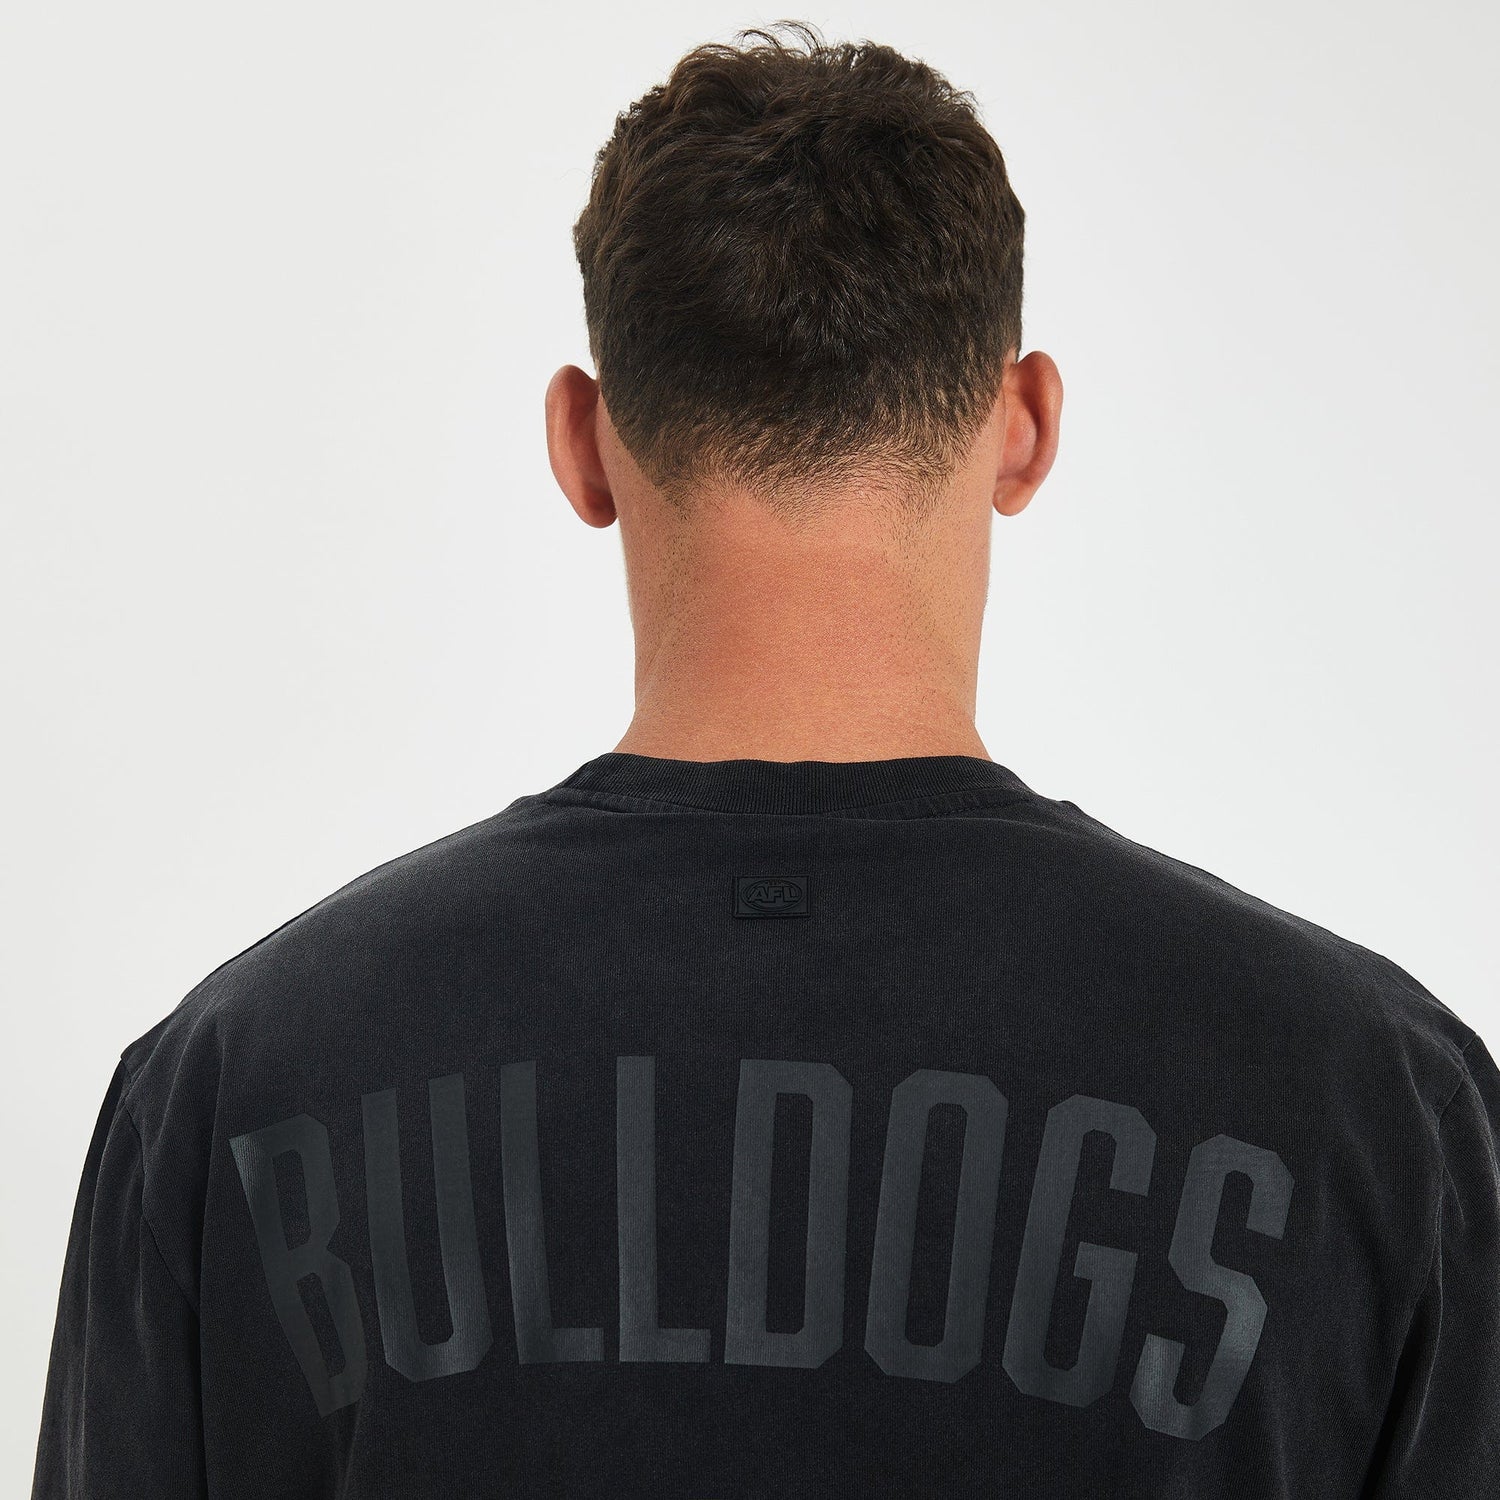 Western Bulldogs Relaxed Fit T-Shirt Mineral Black